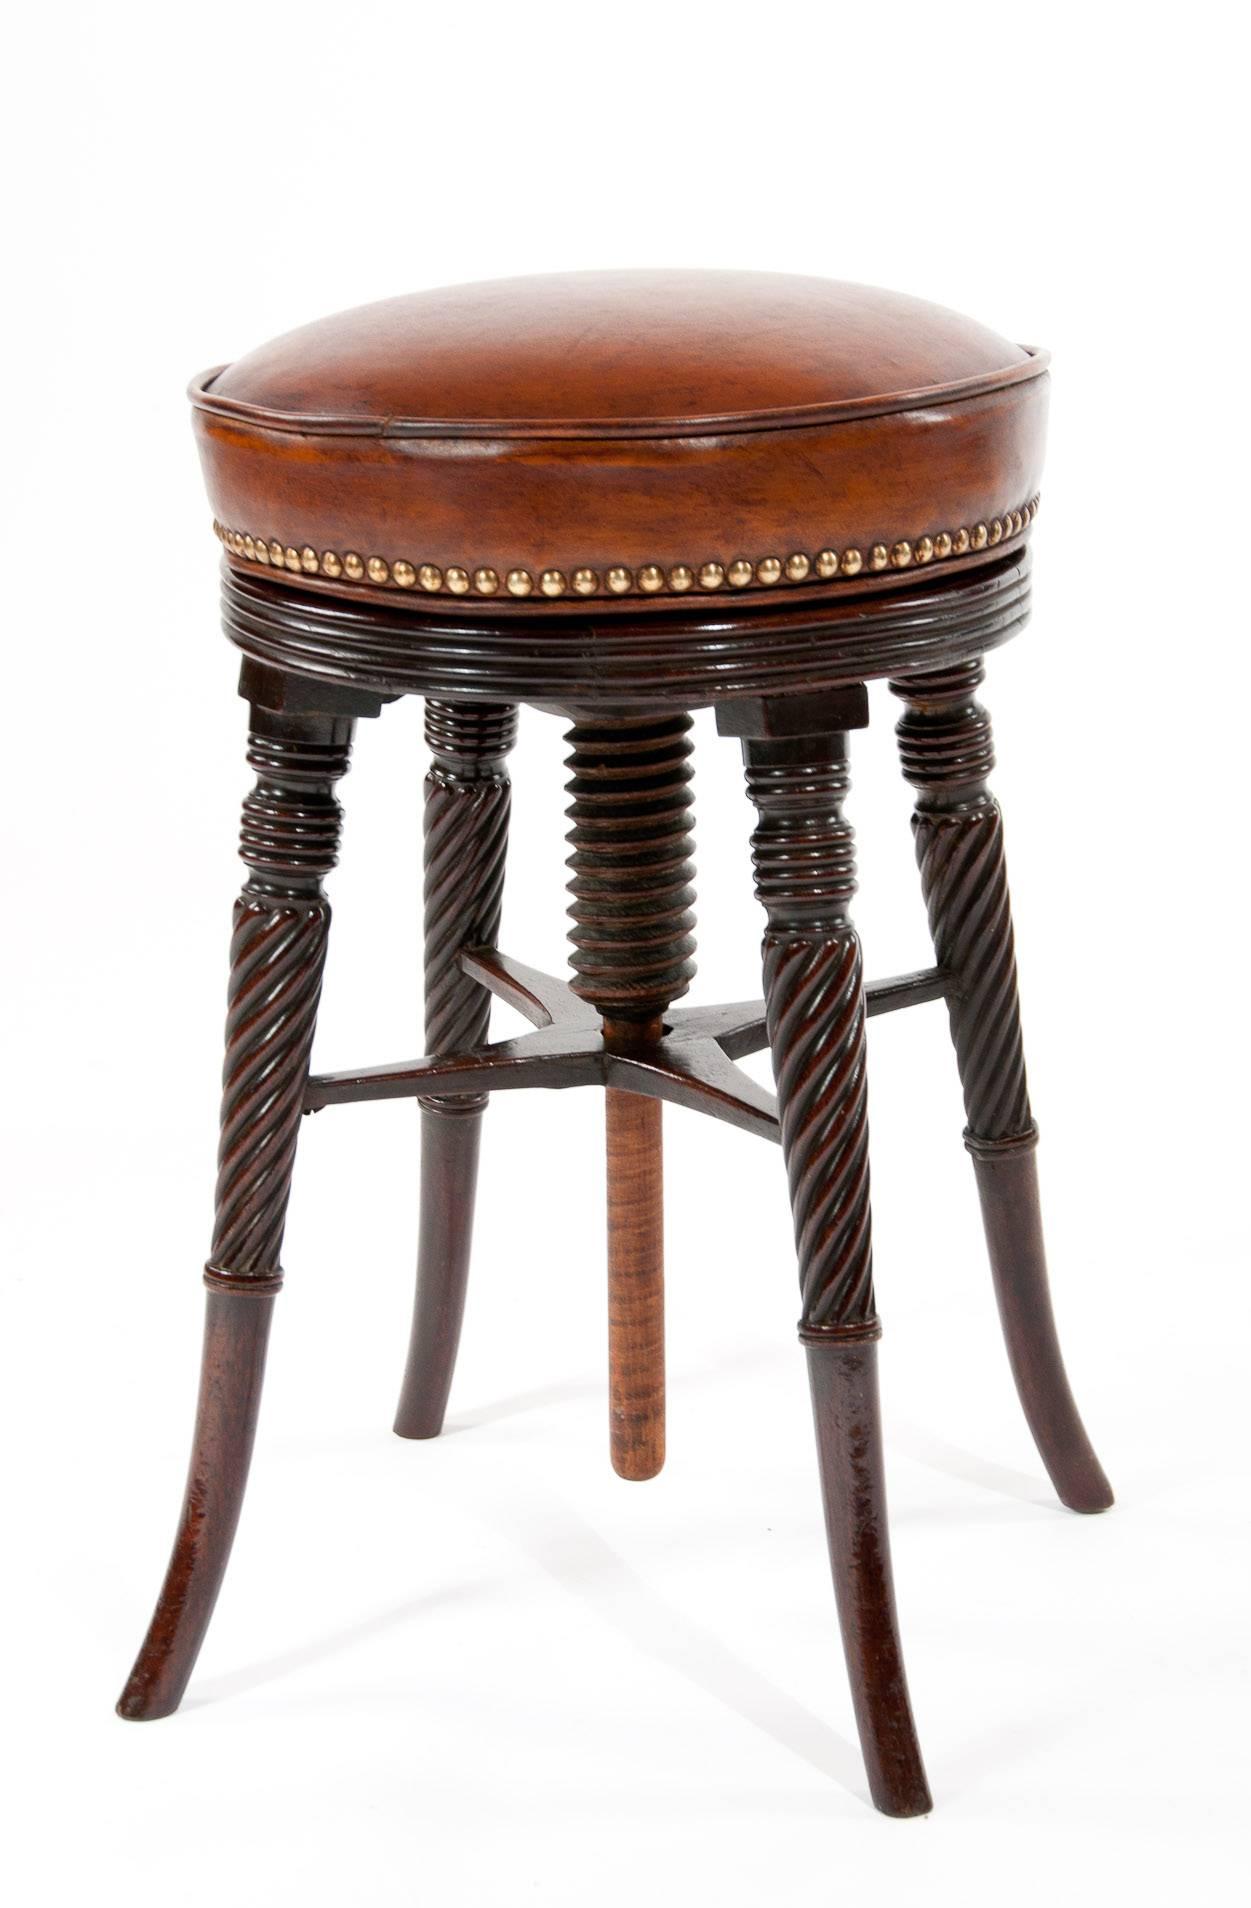 A fine quality Regency adjustable piano stool with a leather upholstered seat. The round tan leather seat being fully adjustable by simply turning to the required height which is support by four of the most elegant turned and twist reeded legs